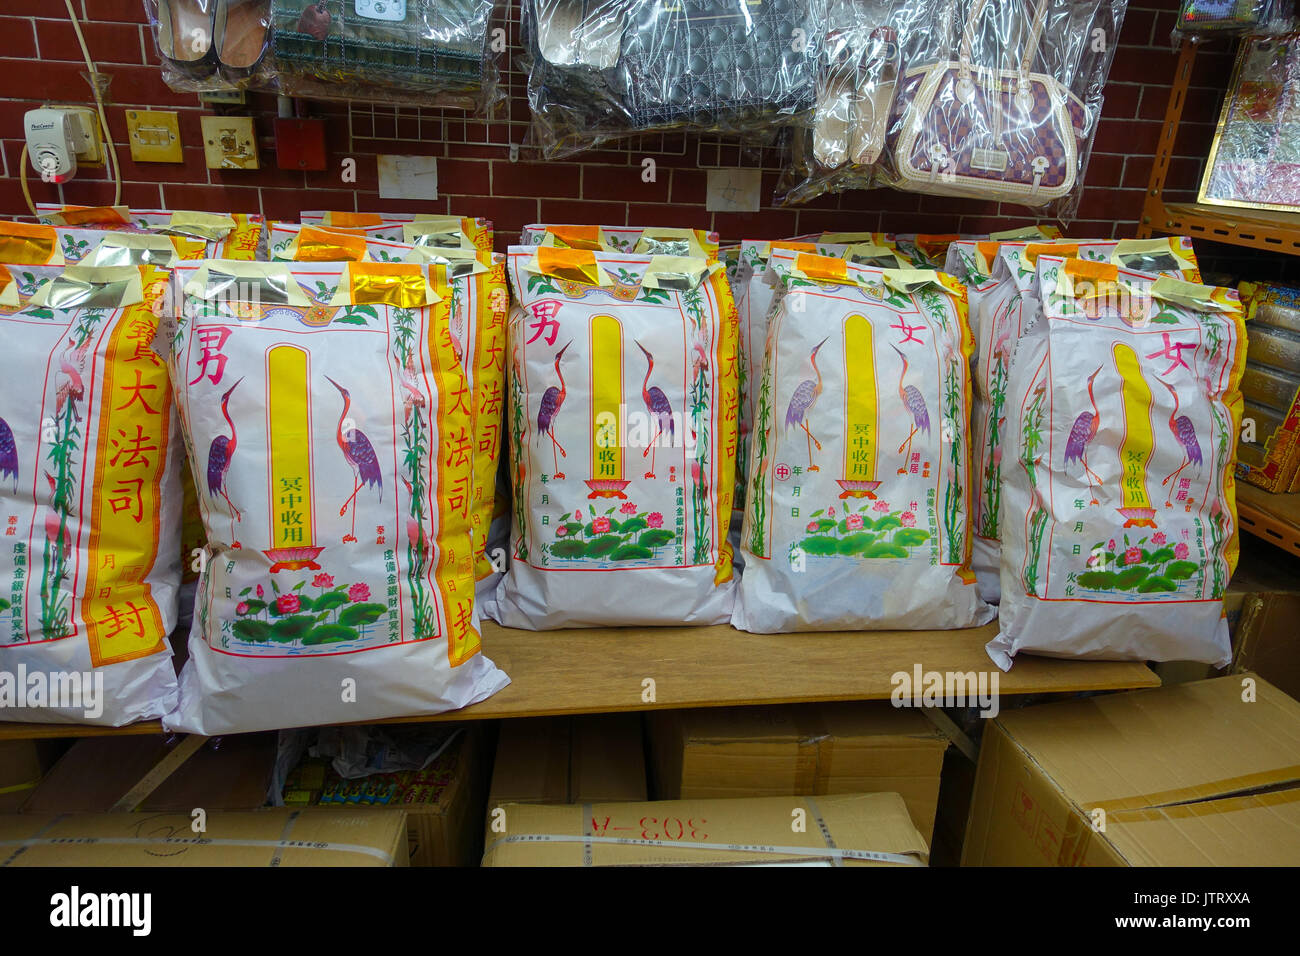 HONG KONG, CHINA - JANUARY 26, 2017: Paper objects for the dead relatives for the afterlife in a store in Hong Kong, China Stock Photo